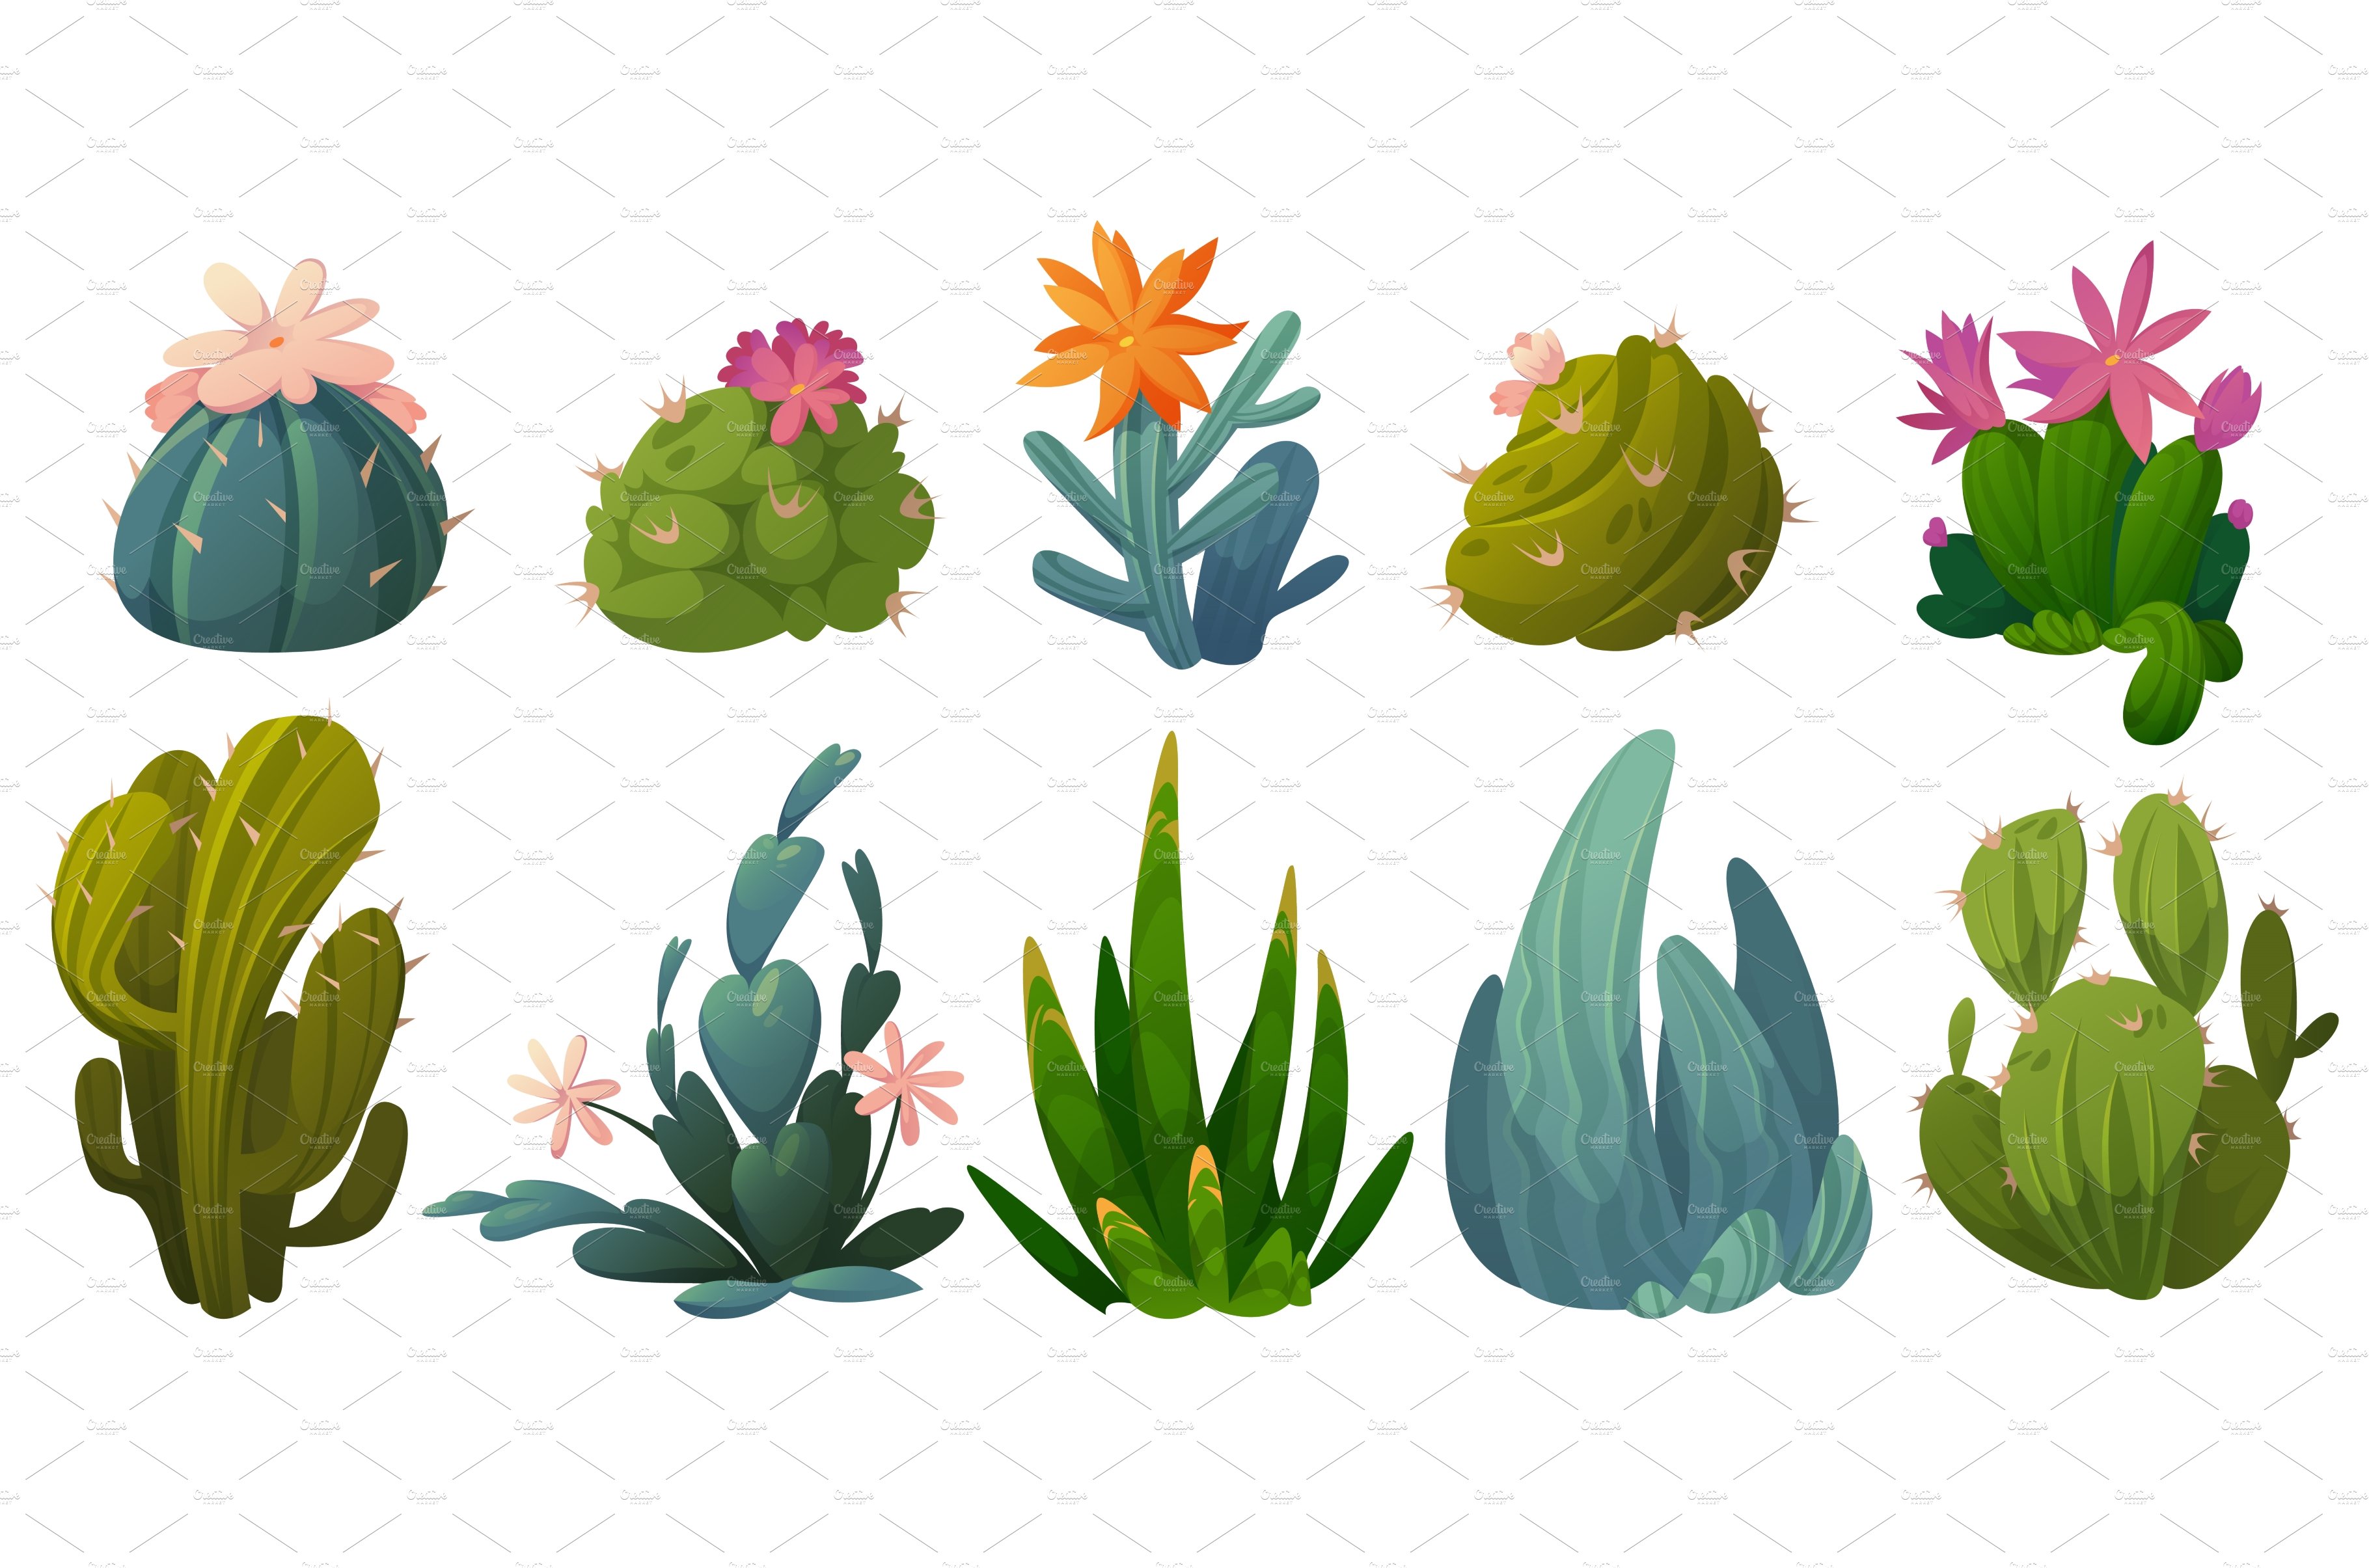 Collection of cactus plants.